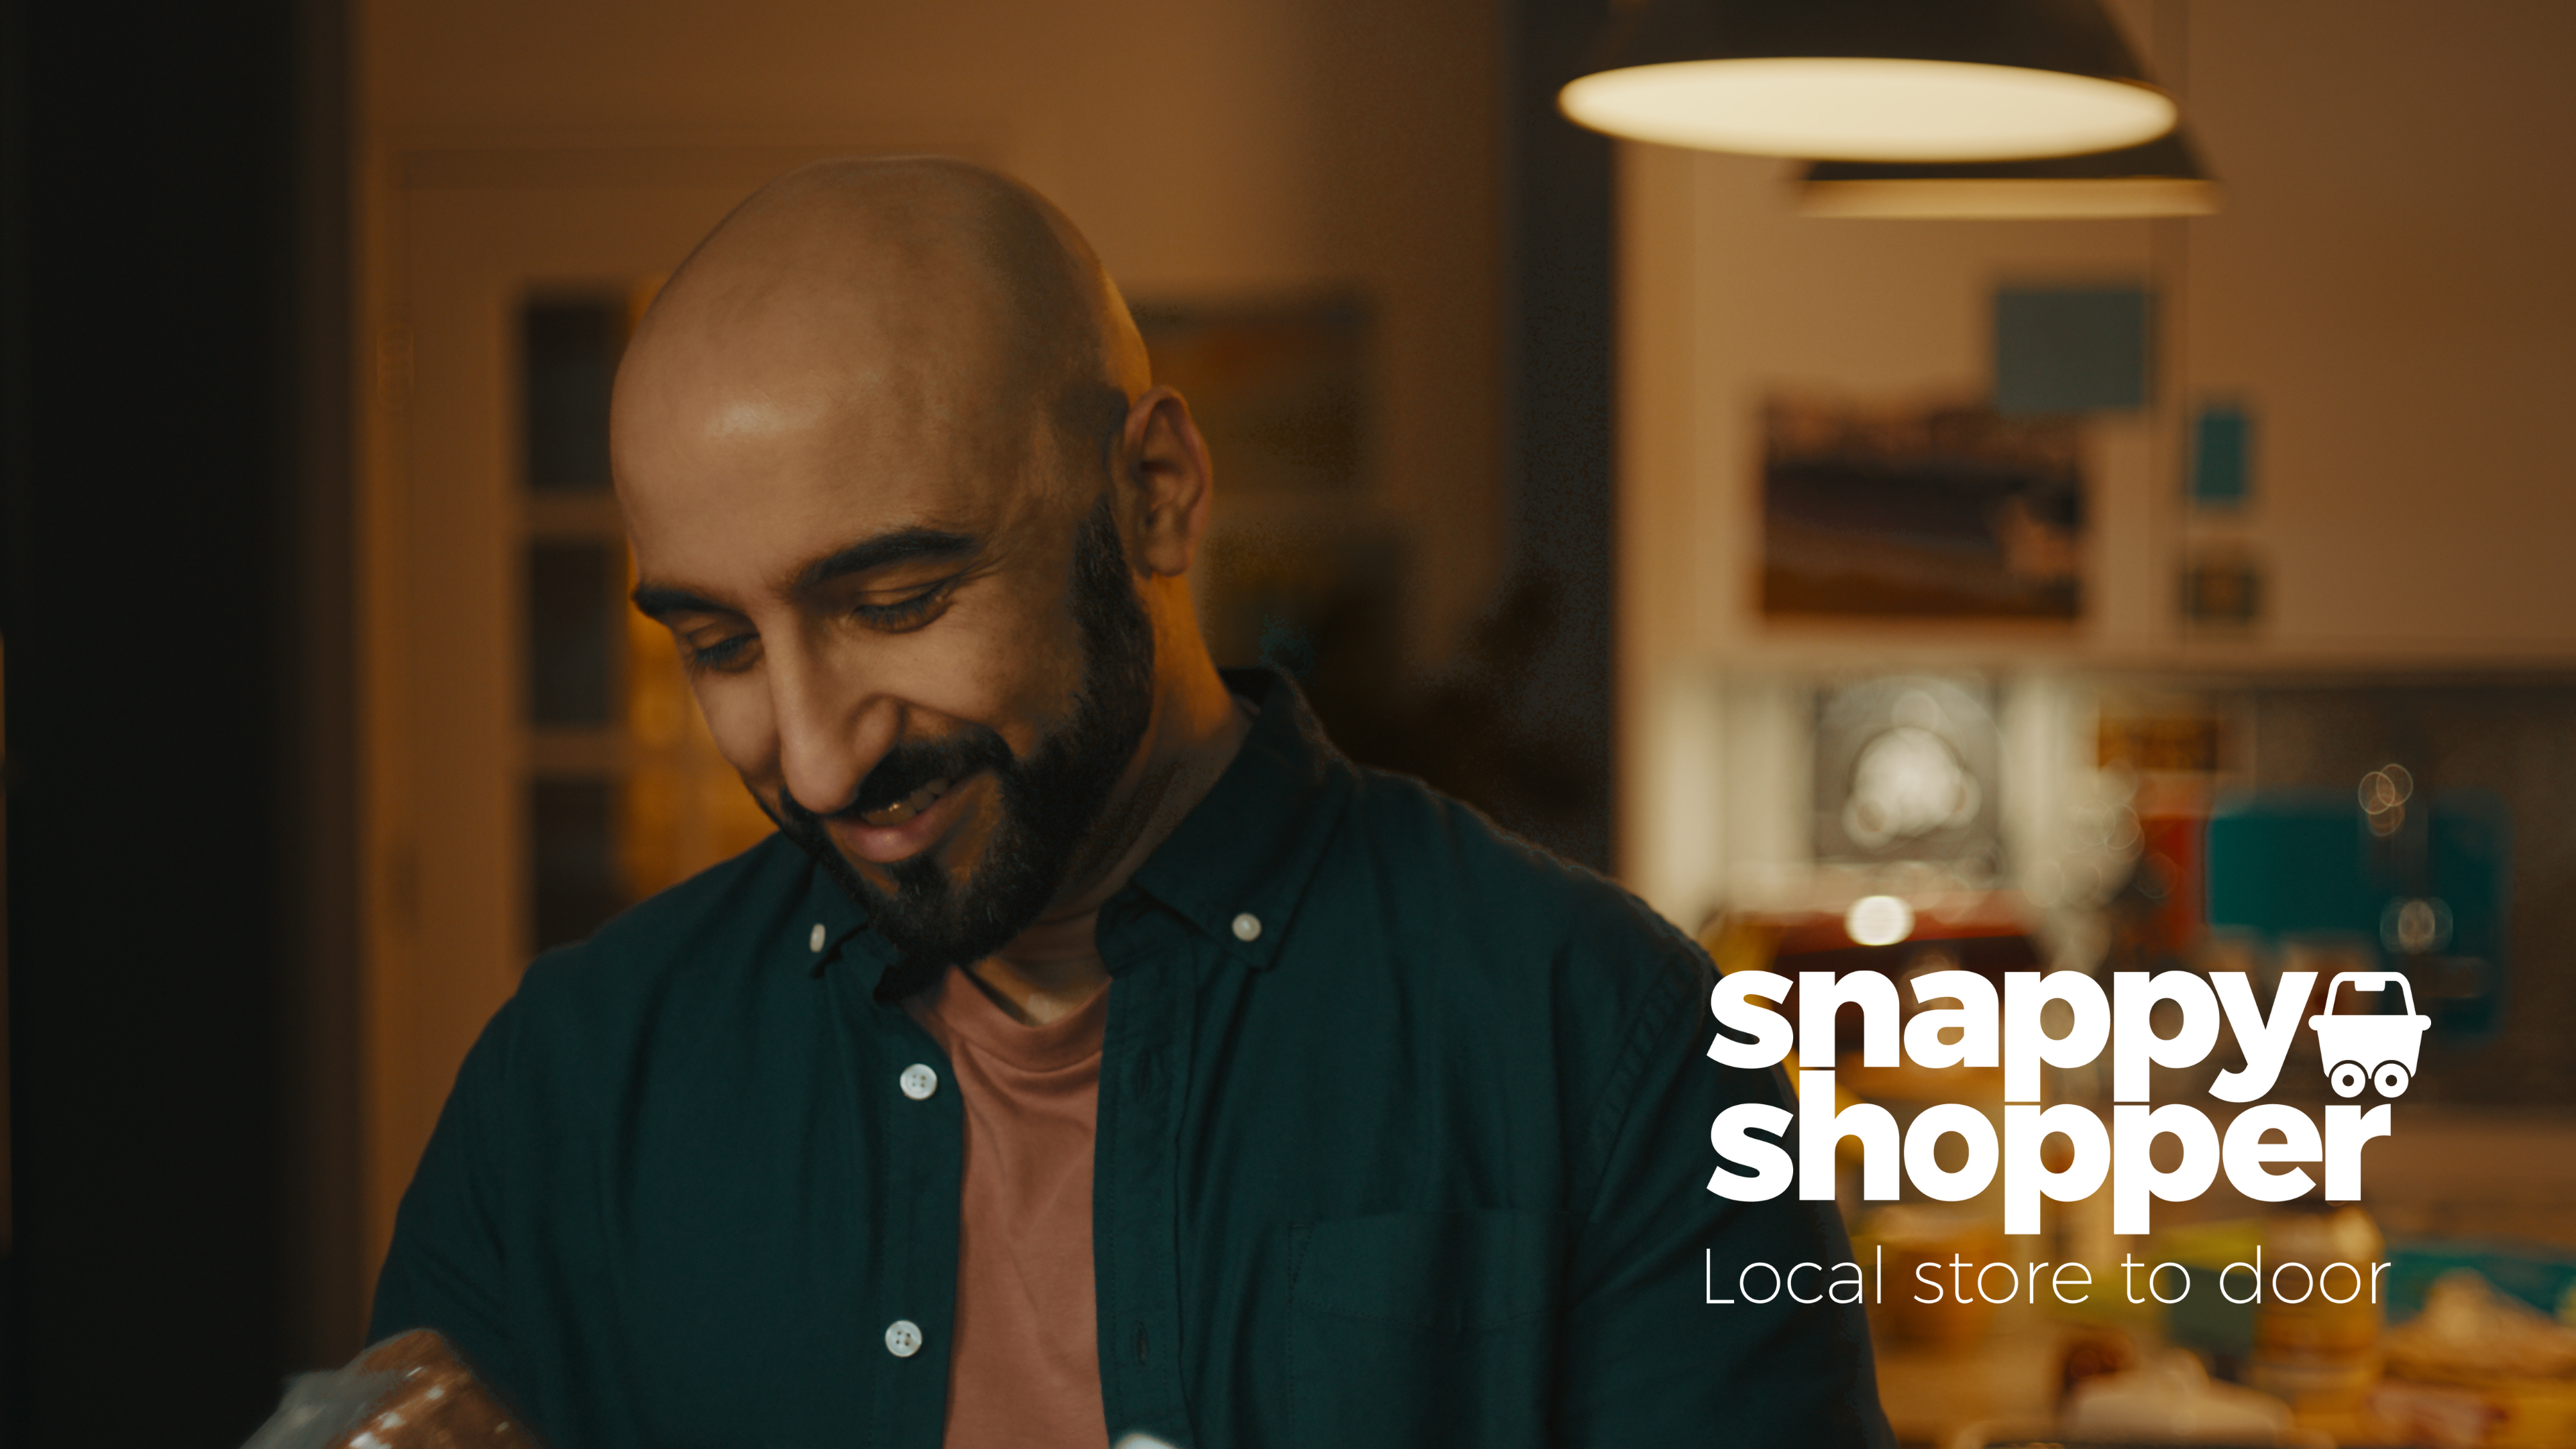 Snappy Shopper launches second national ad campaign